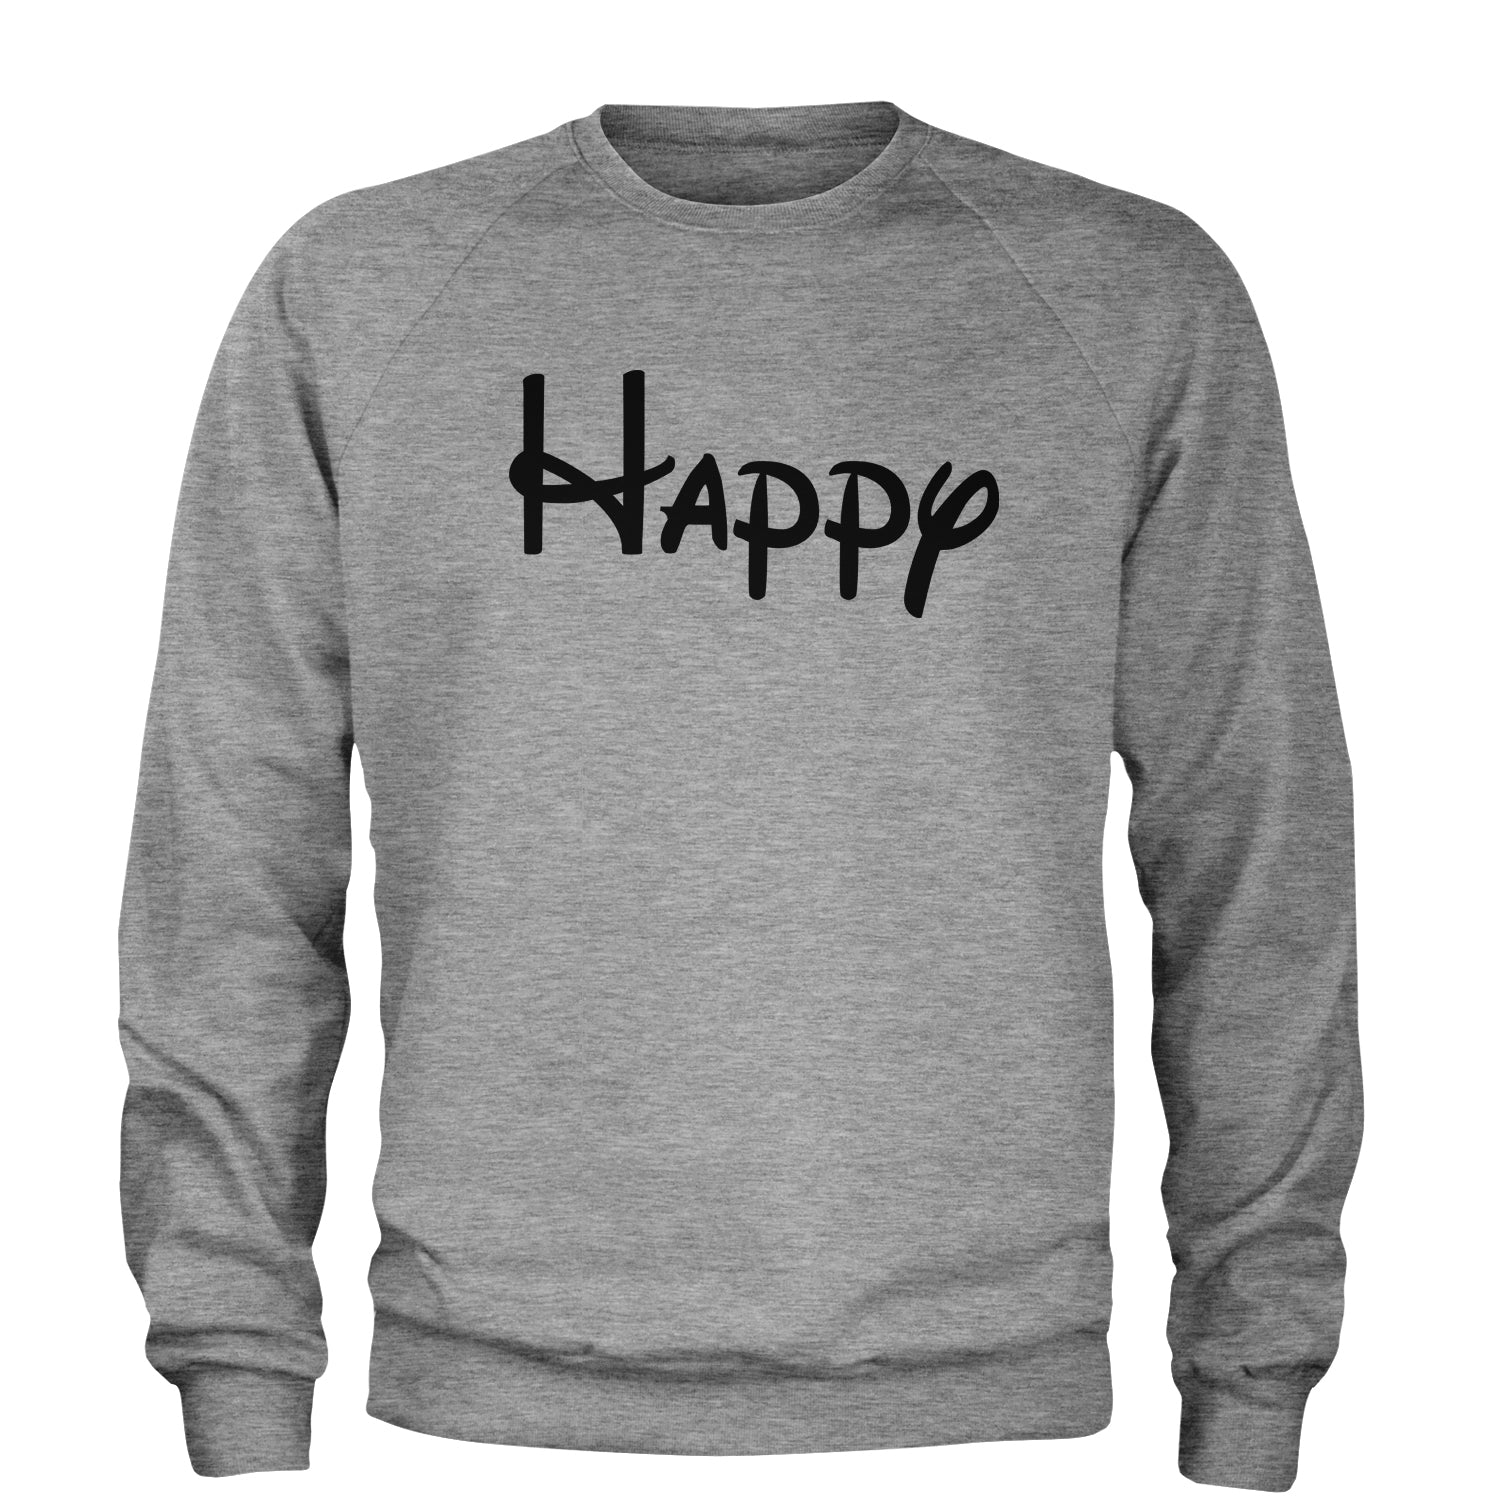 Happy - 7 Dwarfs Costume Adult Crewneck Sweatshirt and, costume, dwarfs, group, halloween, matching, seven, snow, the, white by Expression Tees